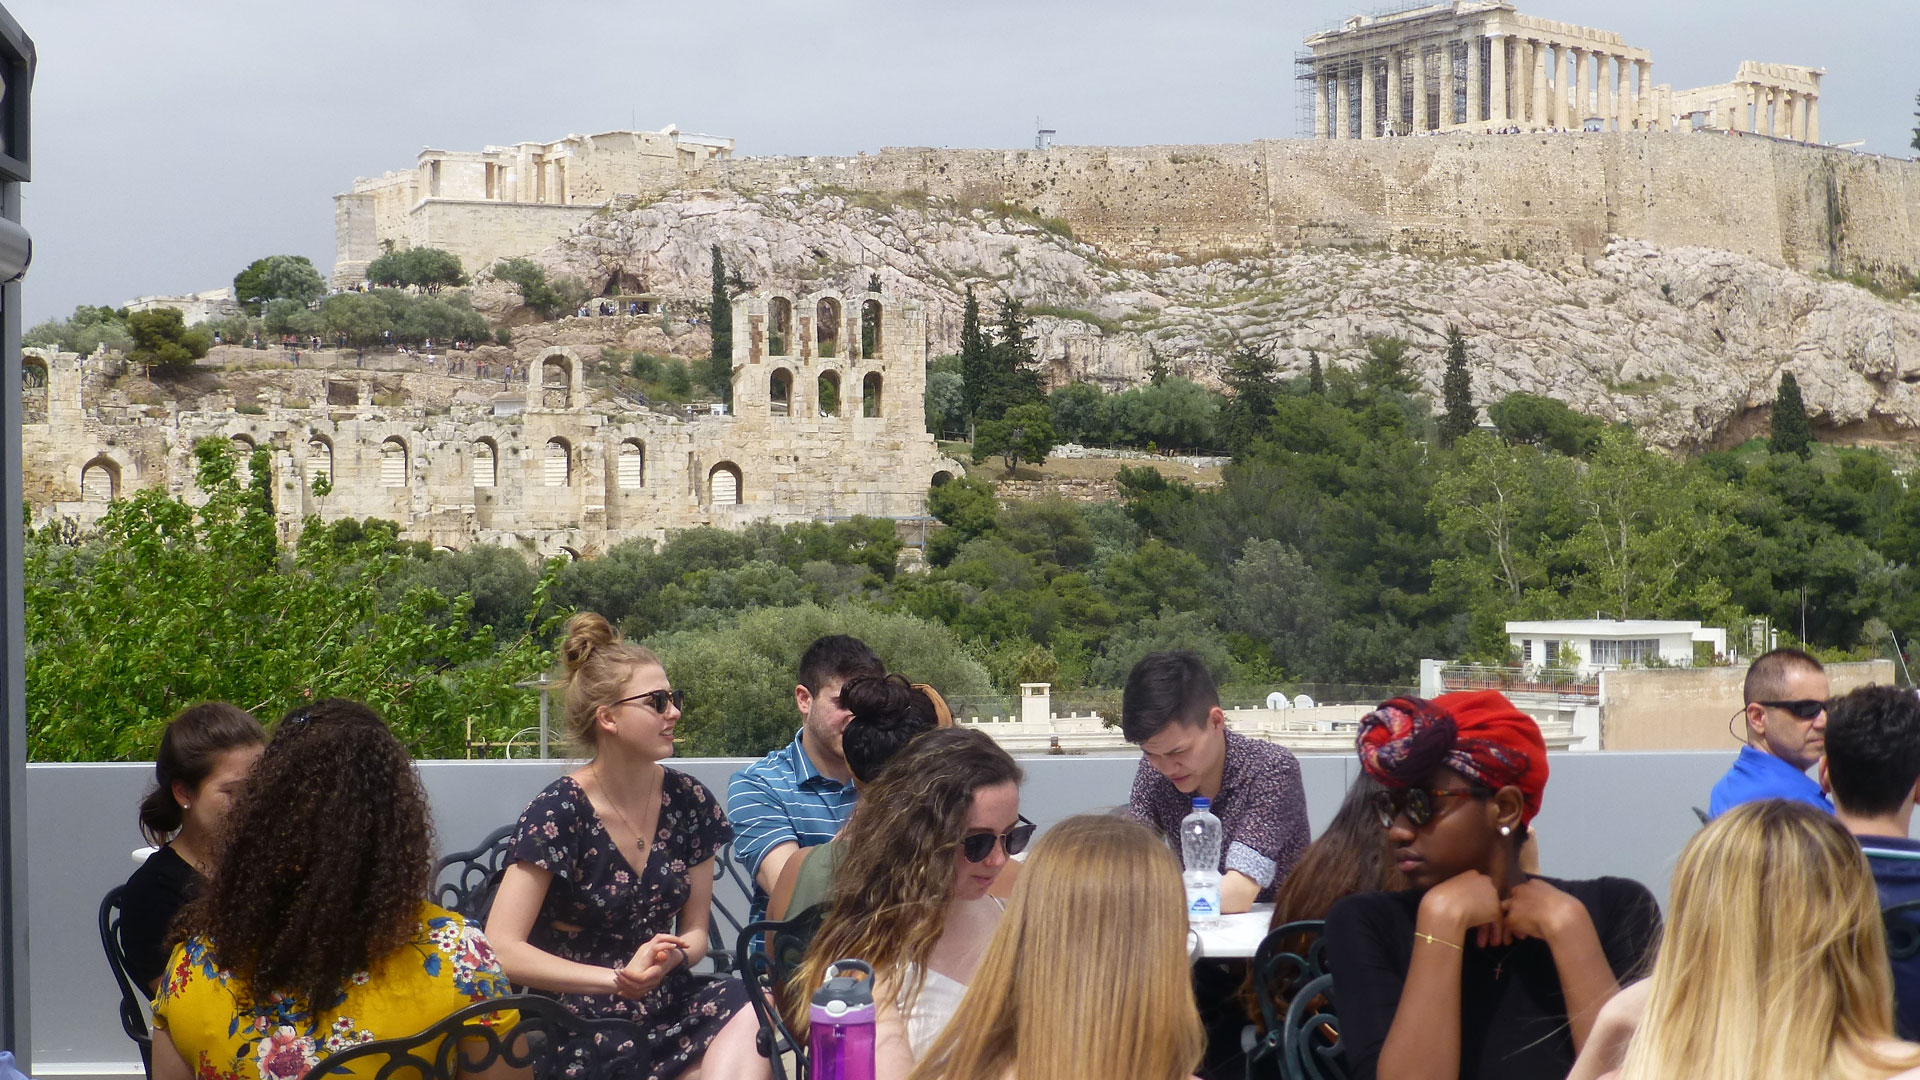 Students on a rooftop terrace with the Athens' Acropolis in the background.